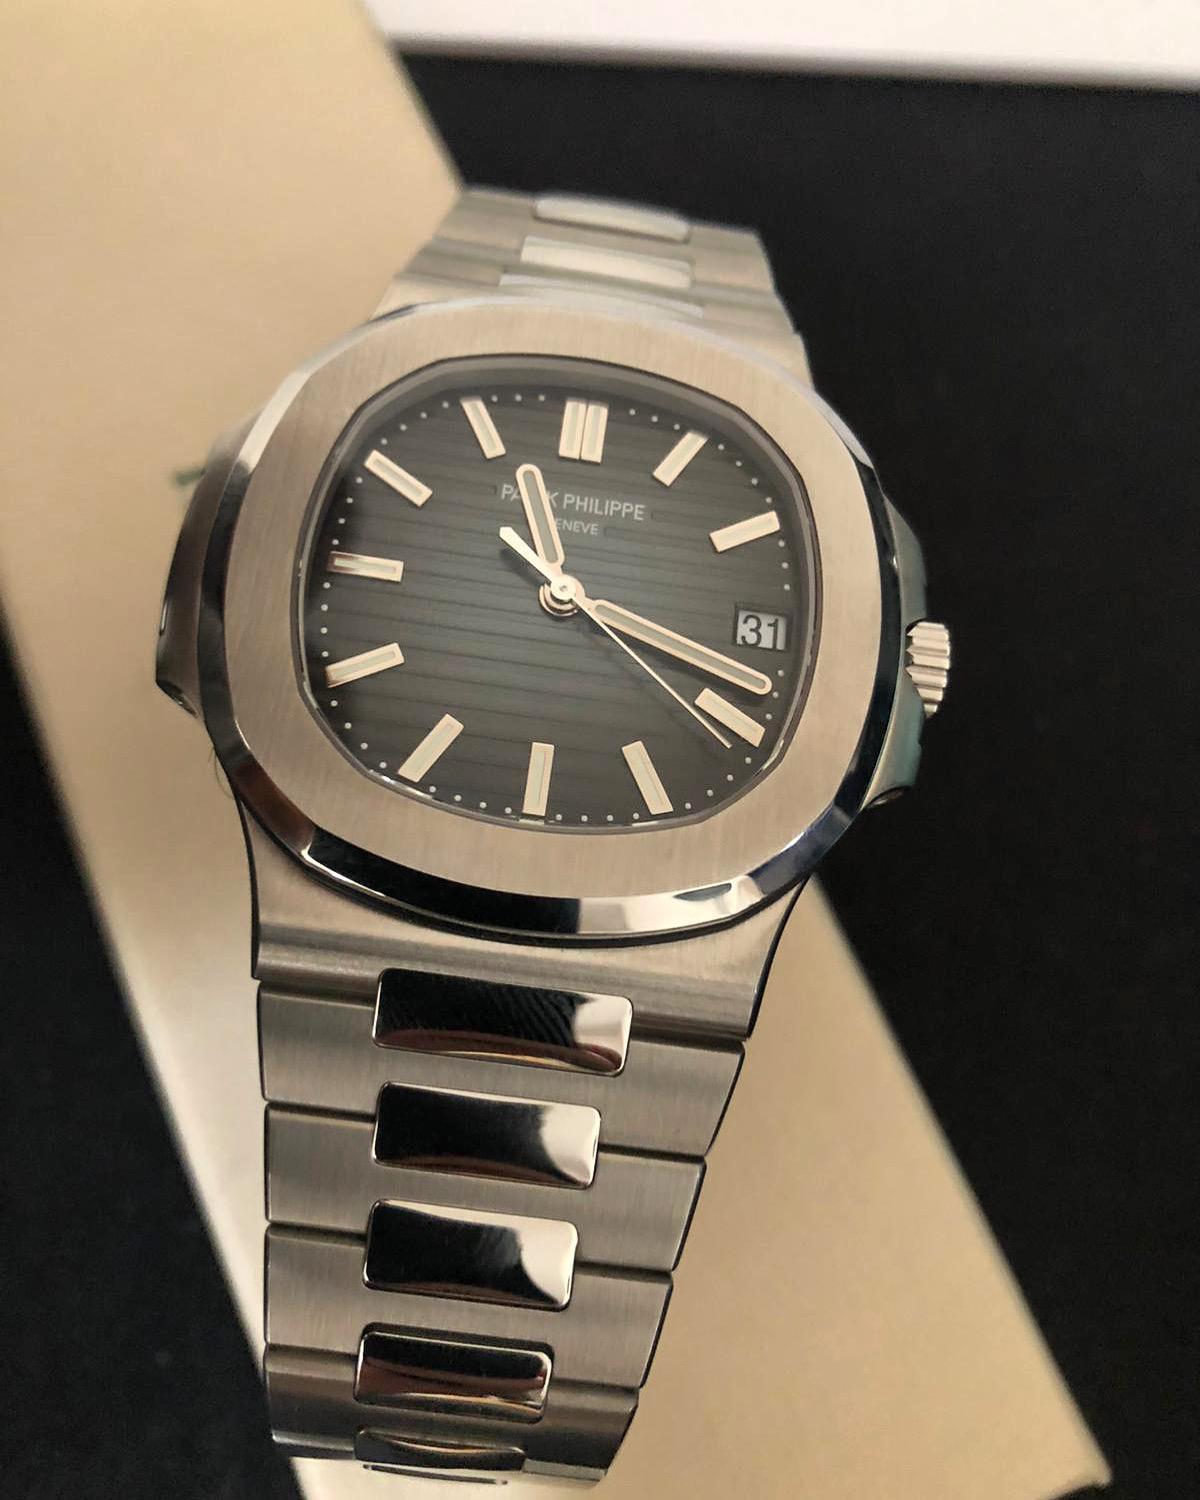 Patek Philippe 
5711/1A - NAUTILUS 
SELF-WINDING
With the rounded octagonal shape of its bezel, the ingenious porthole construction of its case, and its horizontally embossed dial, the Nautilus has epitomized the elegant sports watch since 1976.